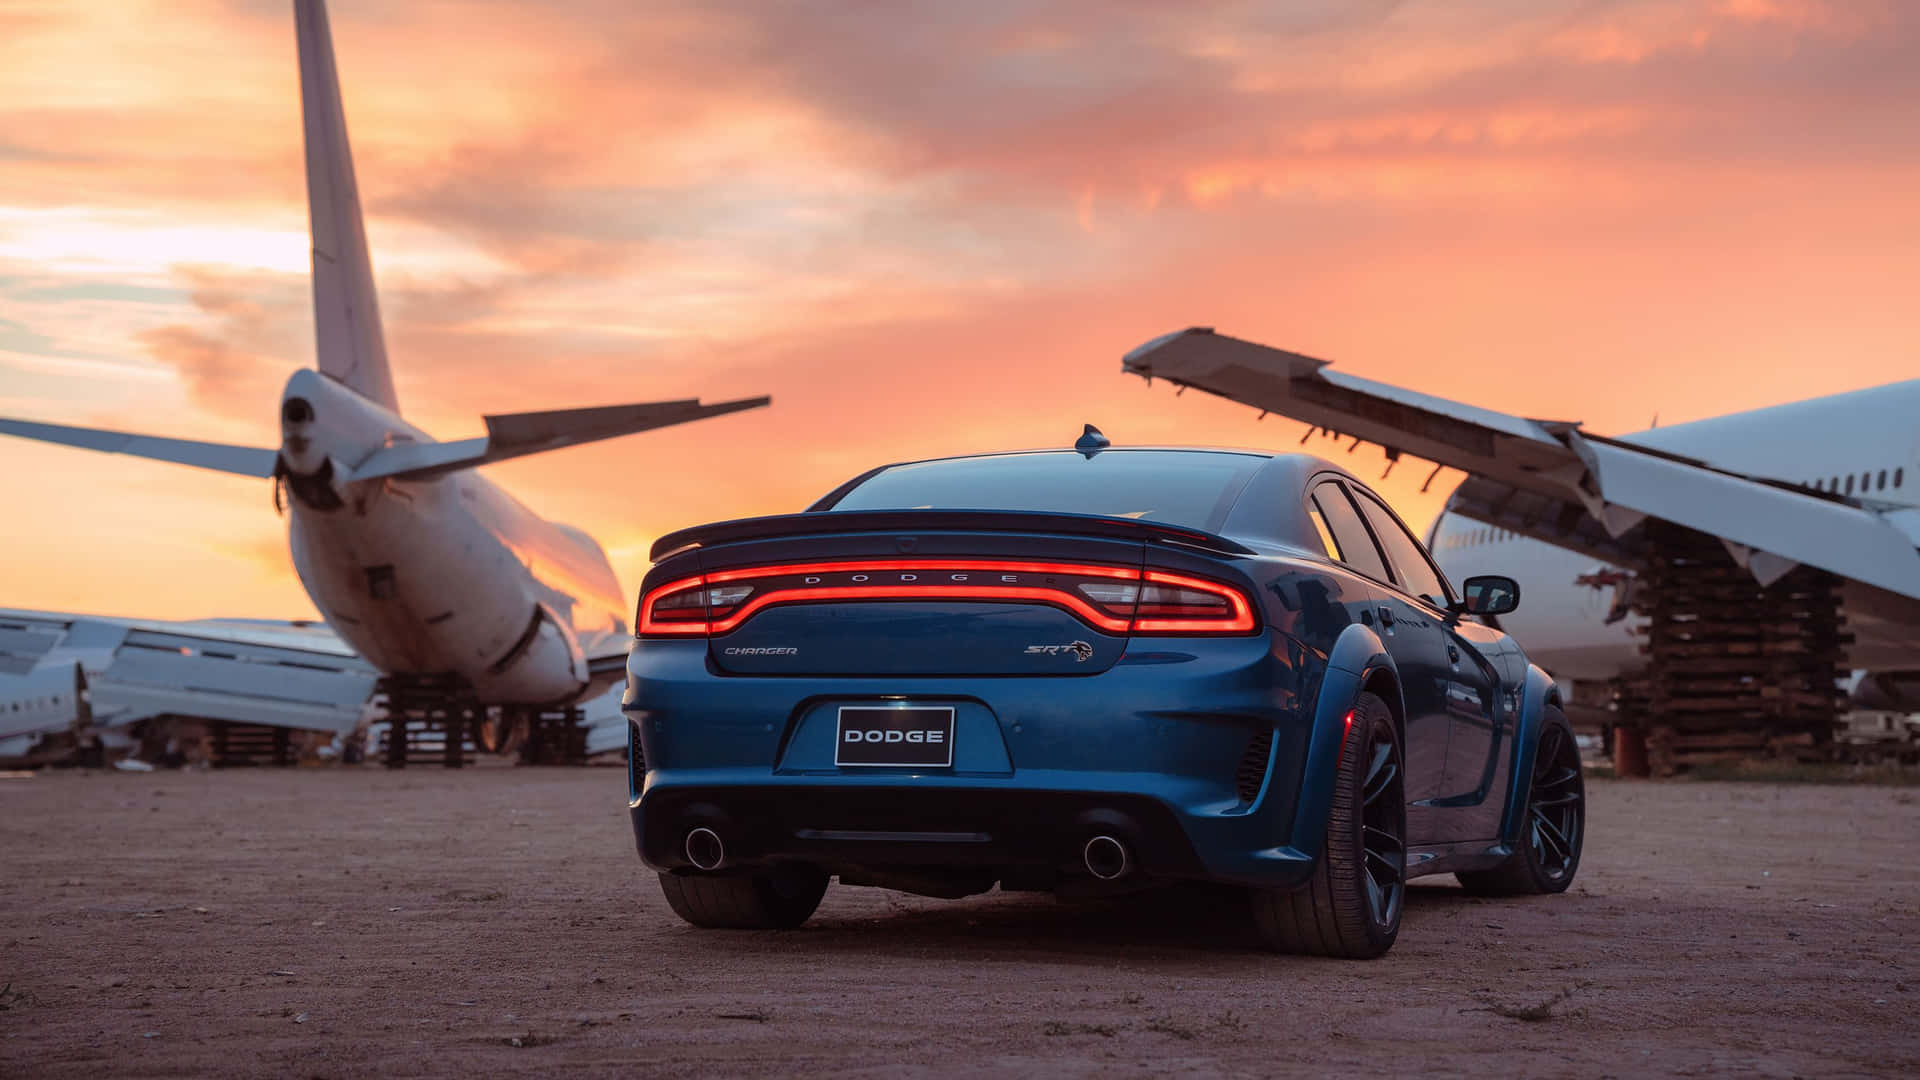 Powerful Dodge Charger Roaring on the Road Wallpaper